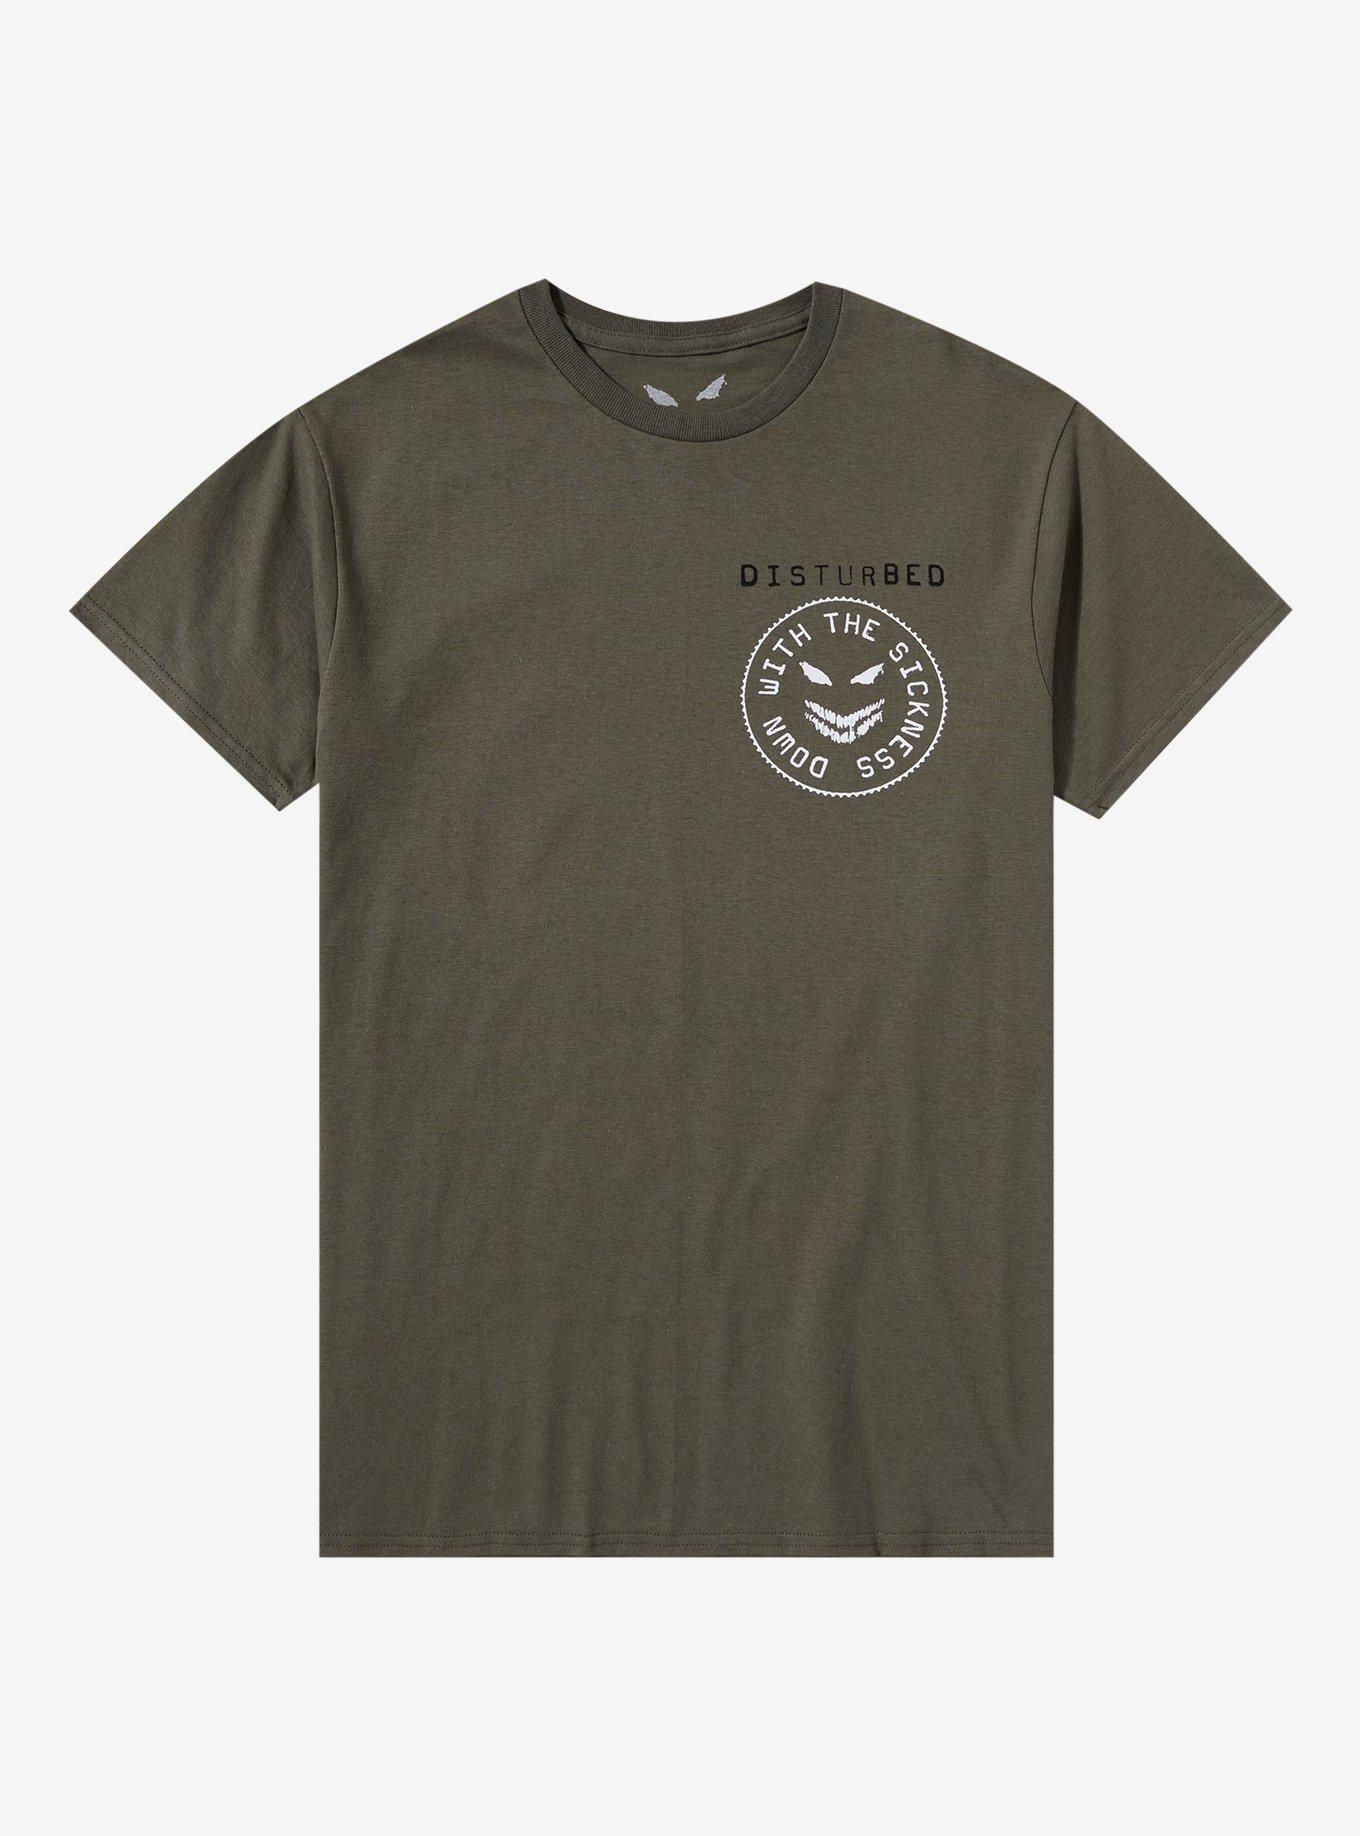 Disturbed Down With The Sickness Demon Face Boyfriend Fit Girls T-Shirt, MILITARY GREEN, hi-res